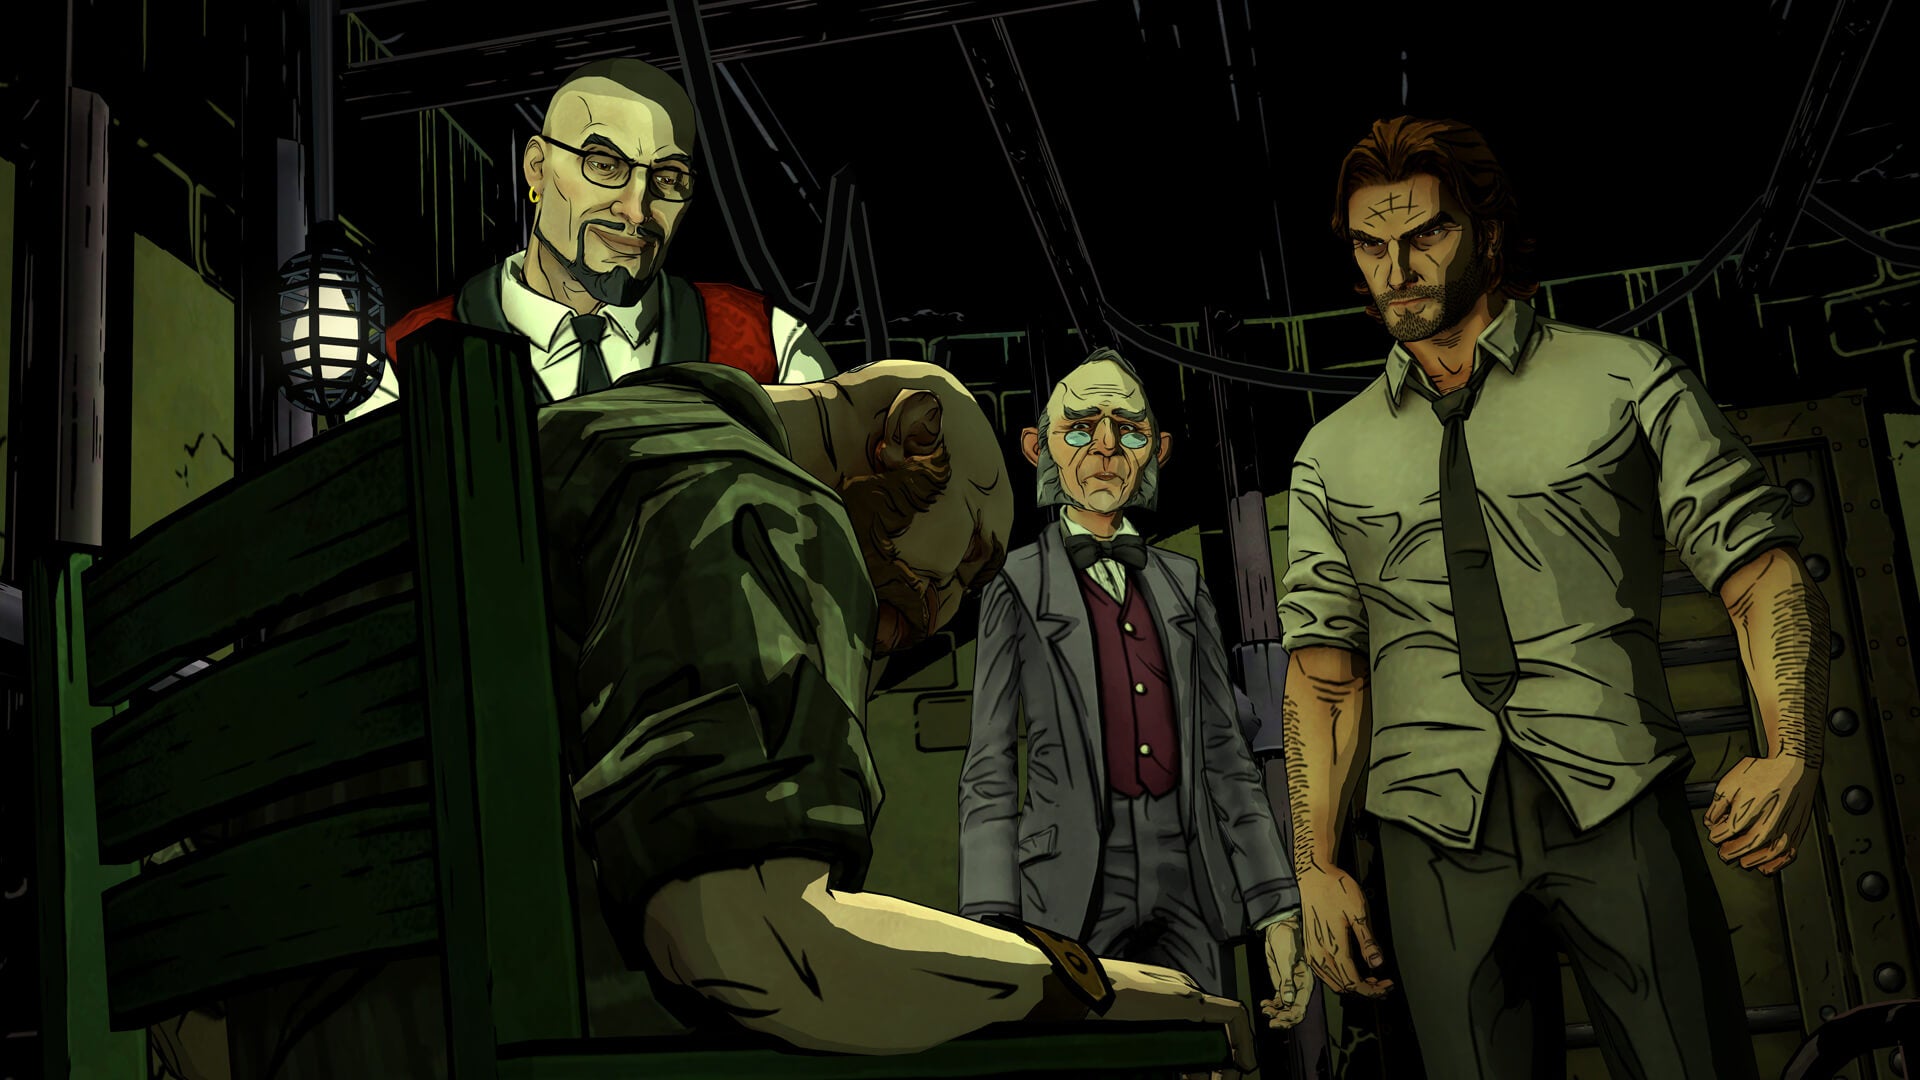 Image for Telltale Games revival is aiming for a "stable, non-crunch work environment"